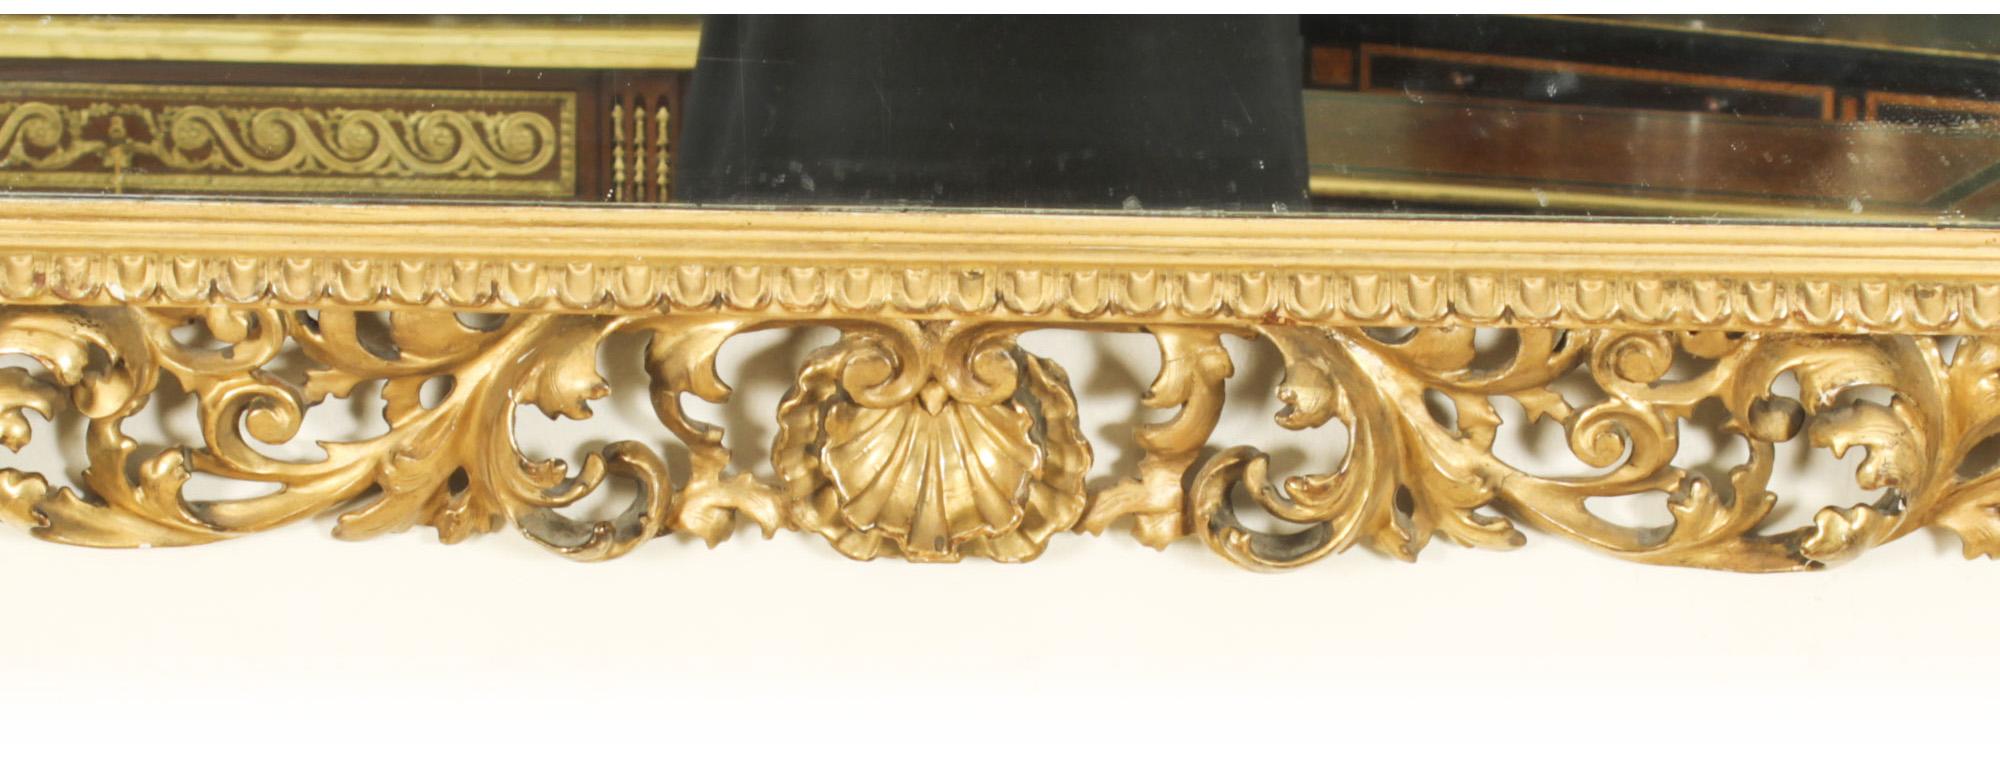 Carved Antique Italian Giltwood Florentine Overmantle Mirror 19th Century - 86x102cm For Sale